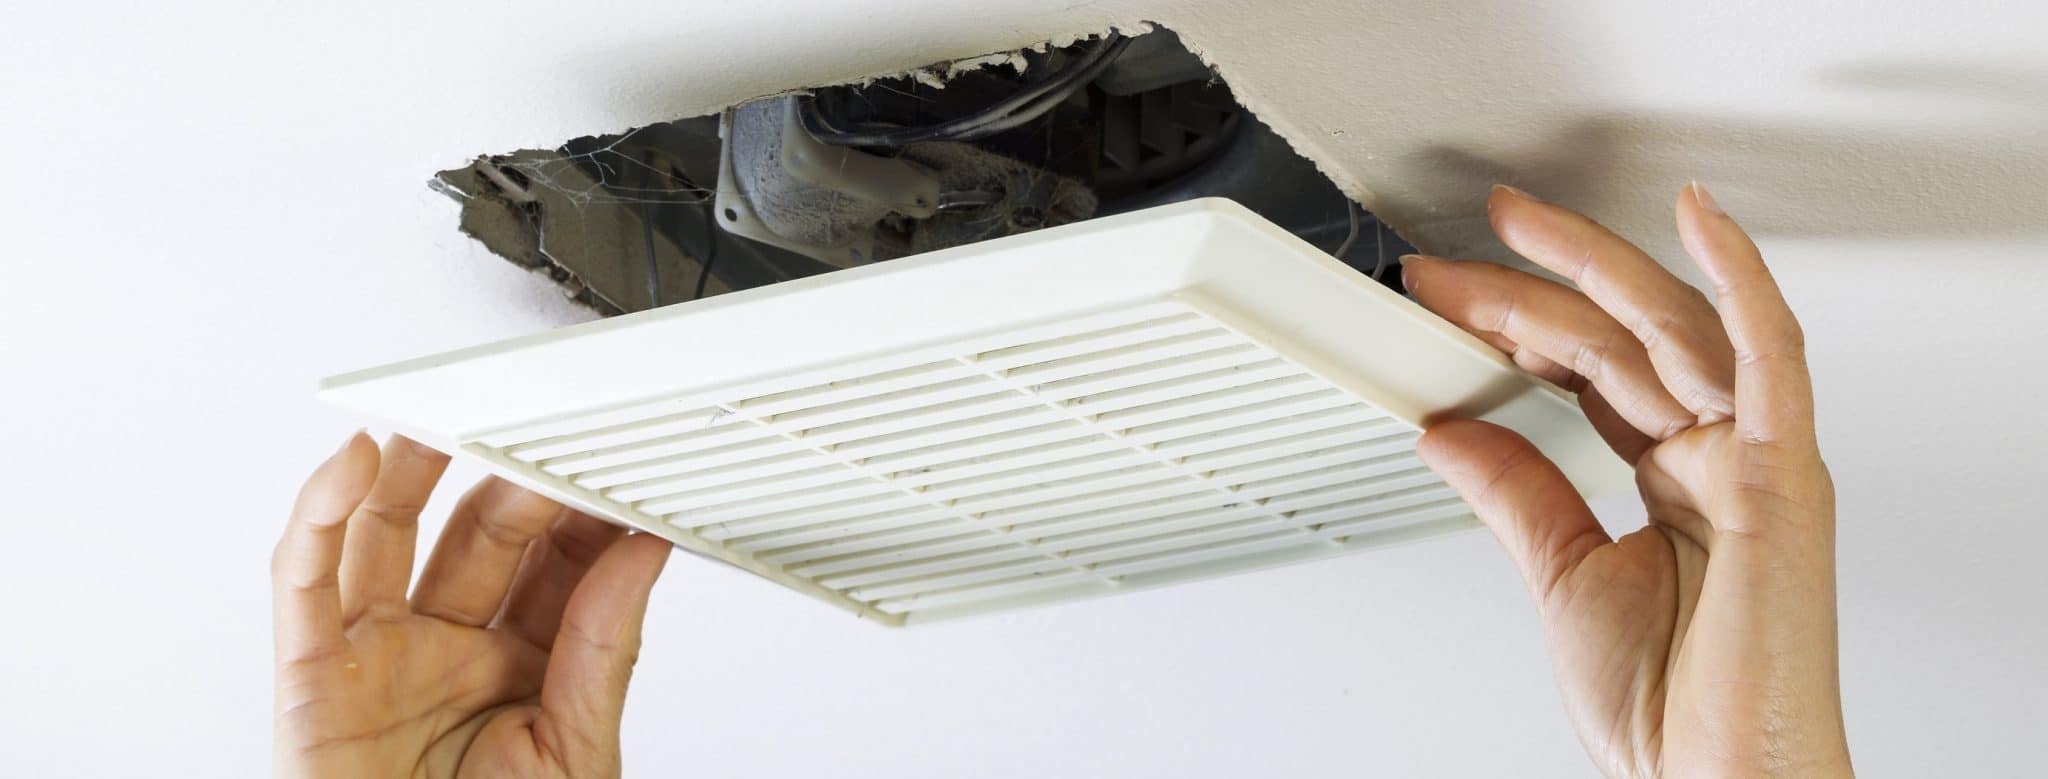 Hands removing vent cover from bathroom ceiling fan